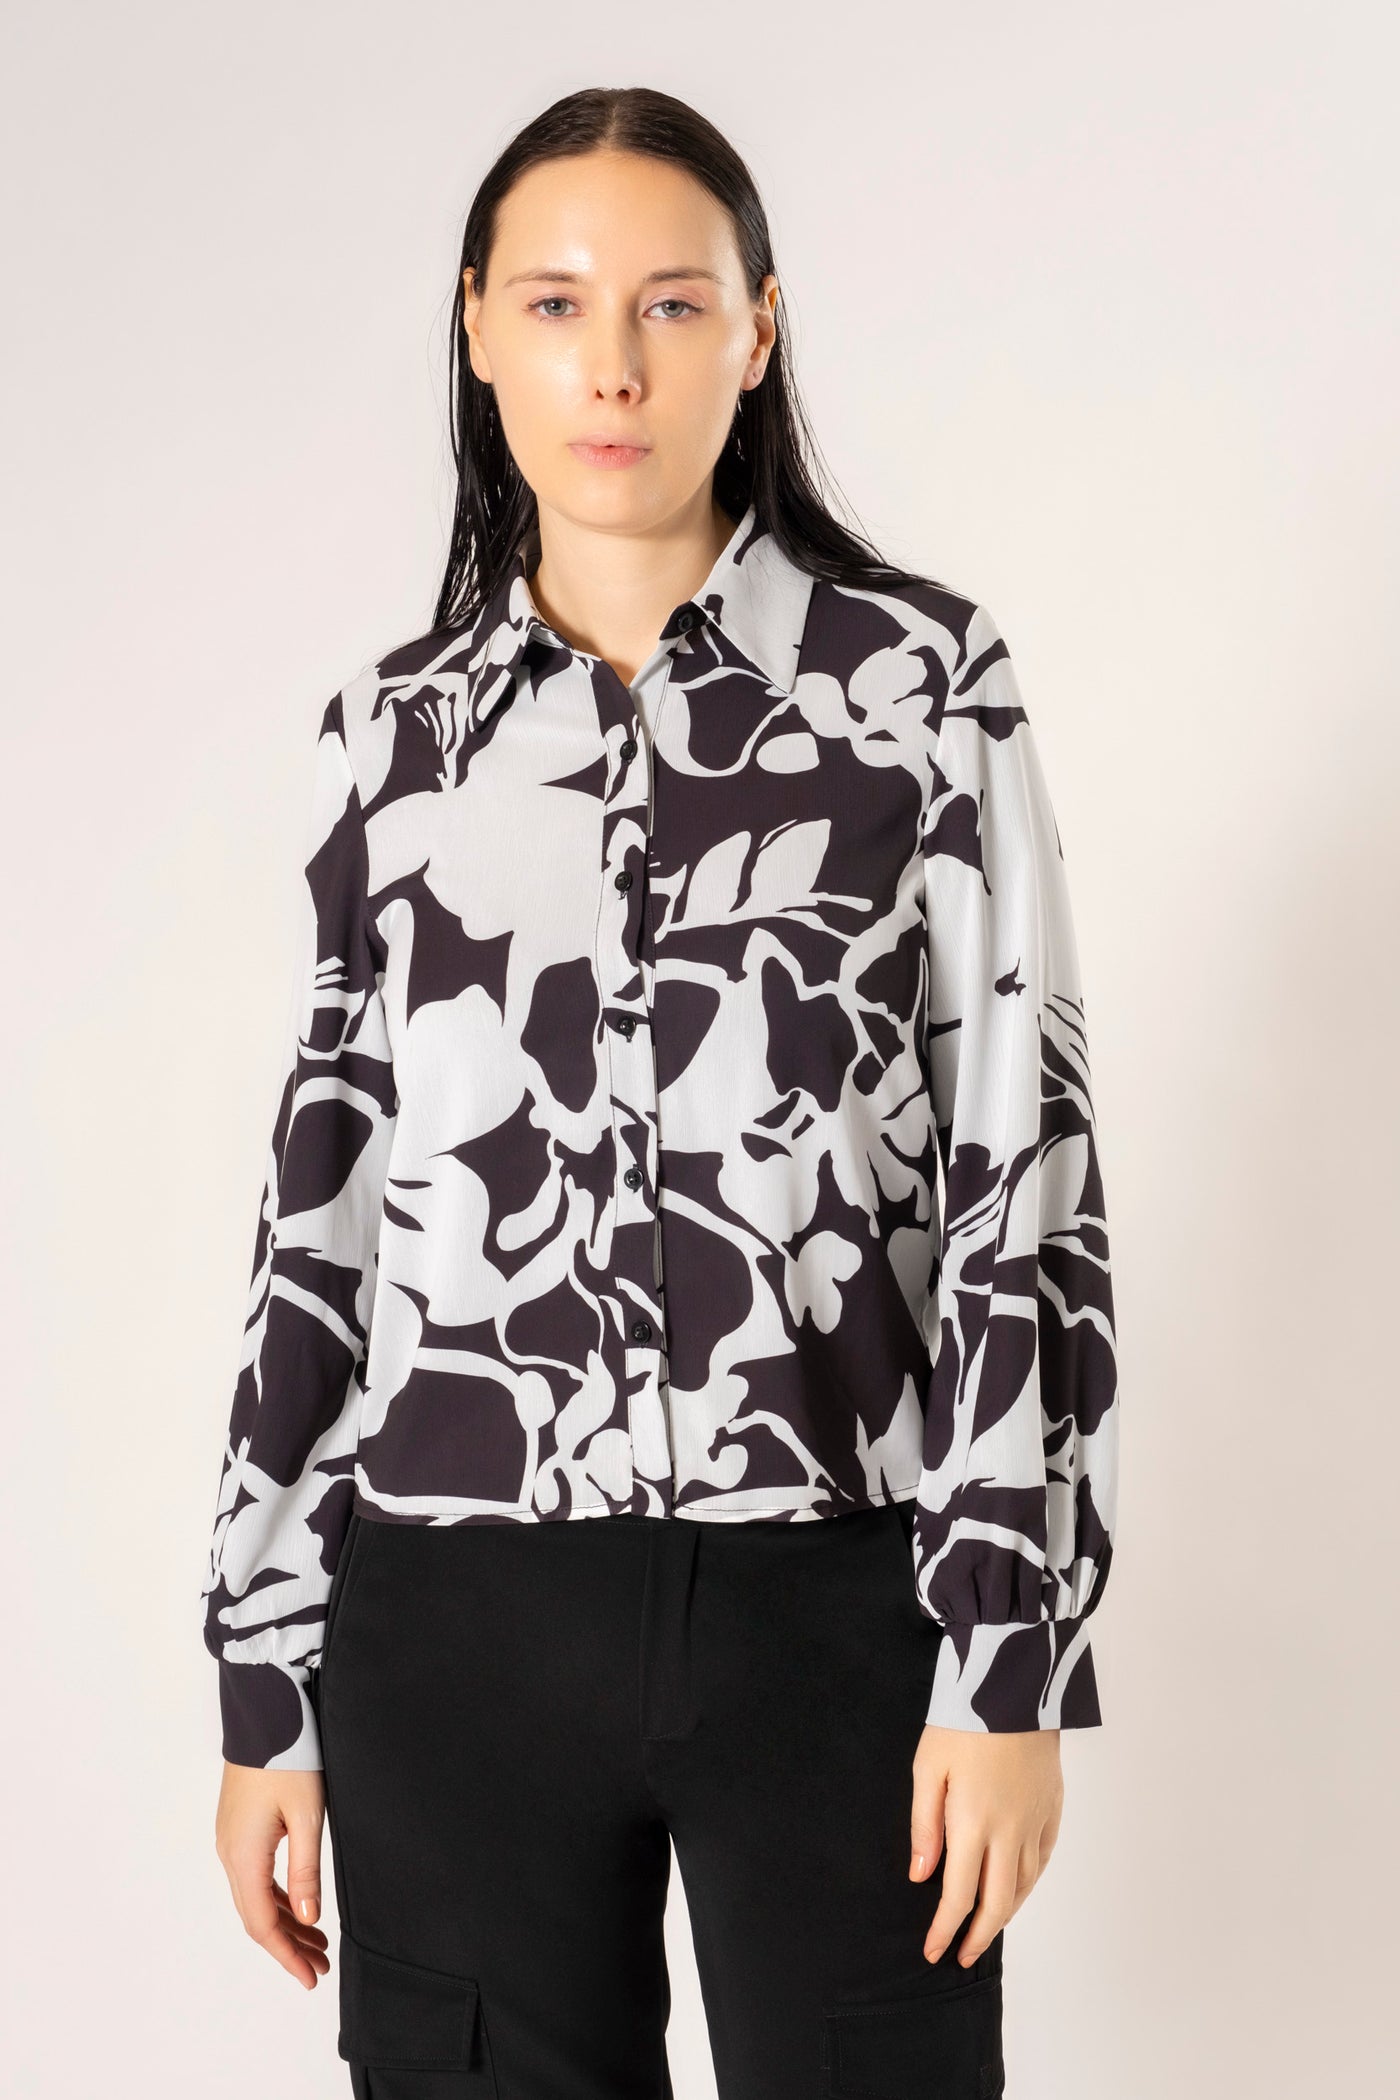 JANE LONG SLEEVE ABSTRACT FLORAL BUTTON UP TOP